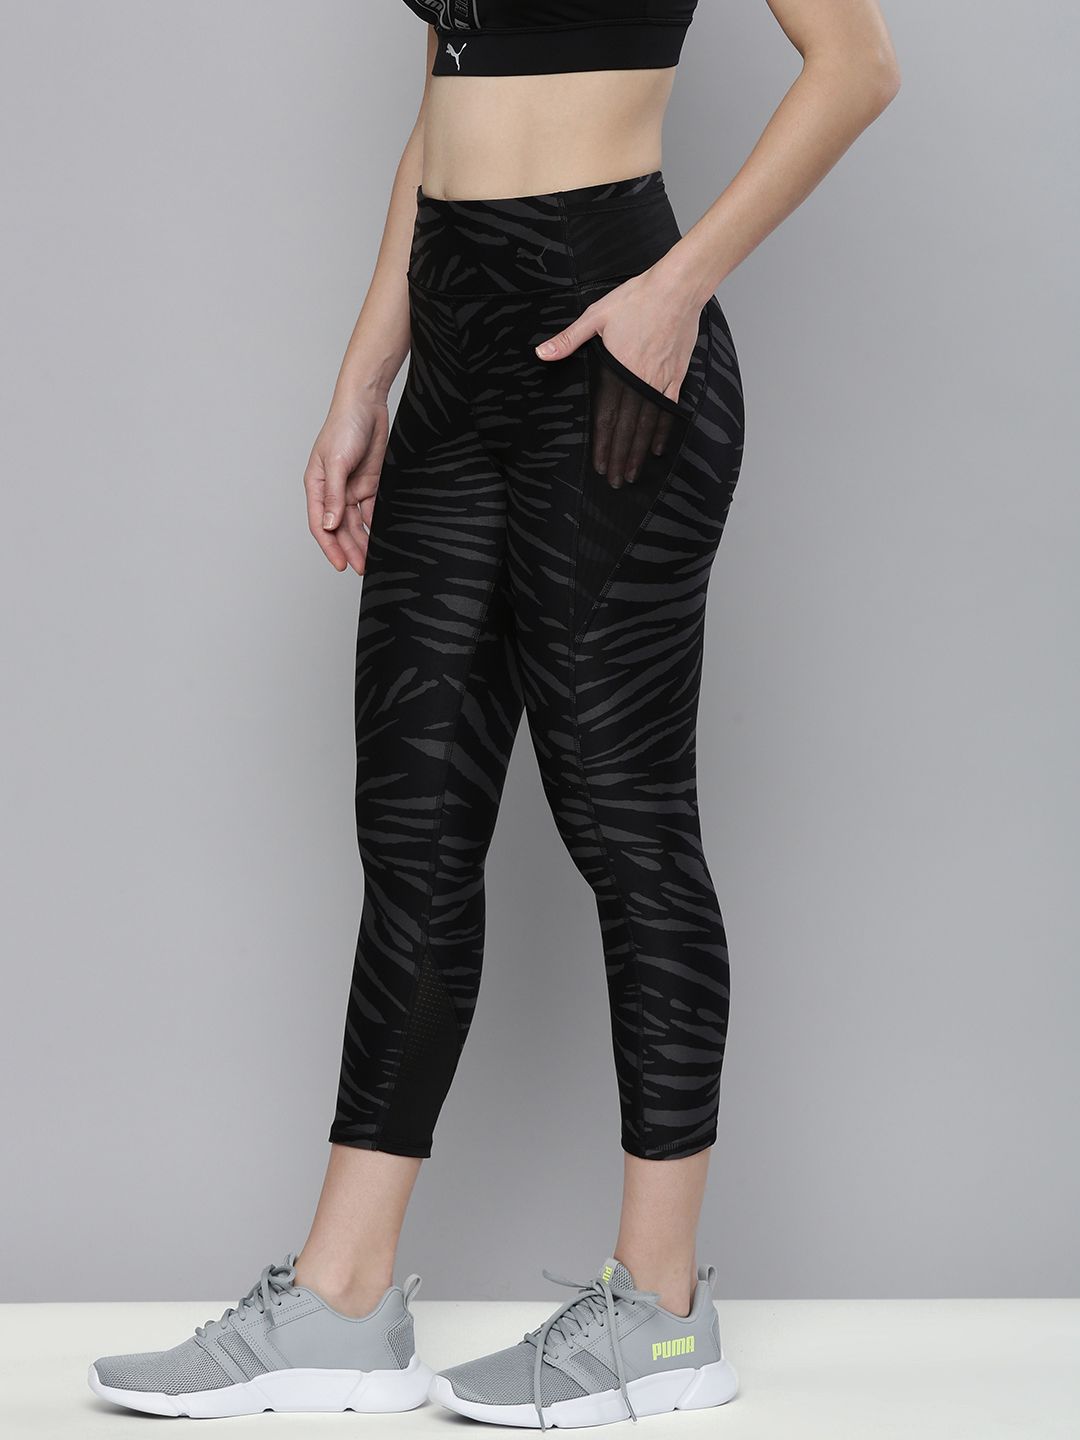 Puma Women Black Printed DryCell Favourite AOP 3/4 Running Tights Price in India